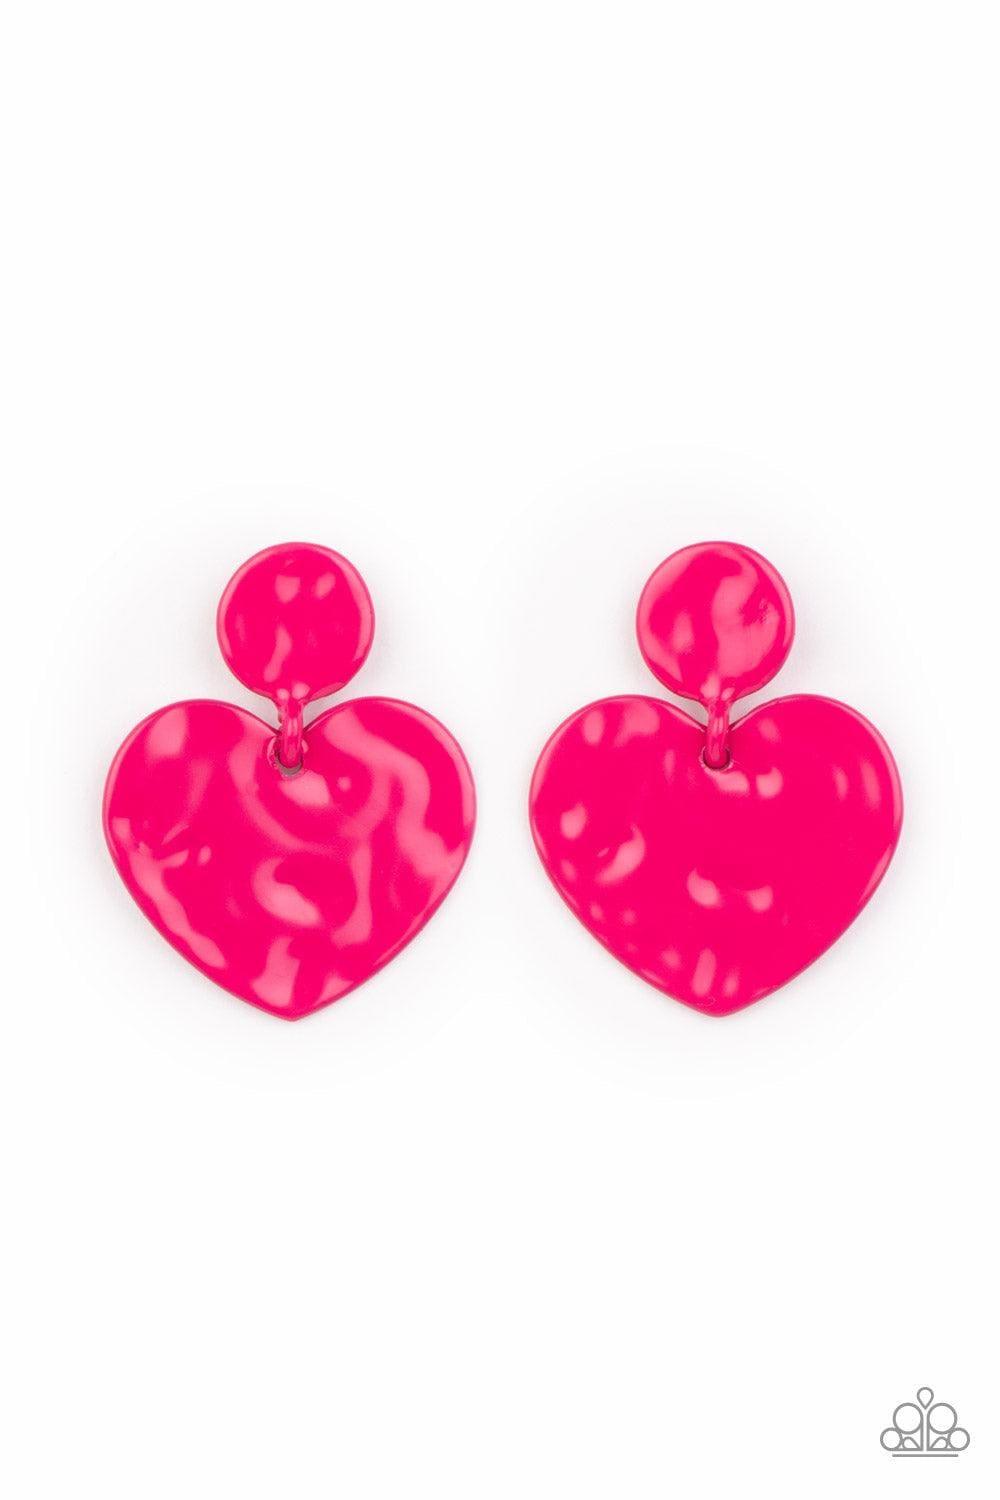 Paparazzi Accessories - Just a Little Crush - Pink Earrings - Bling by JessieK